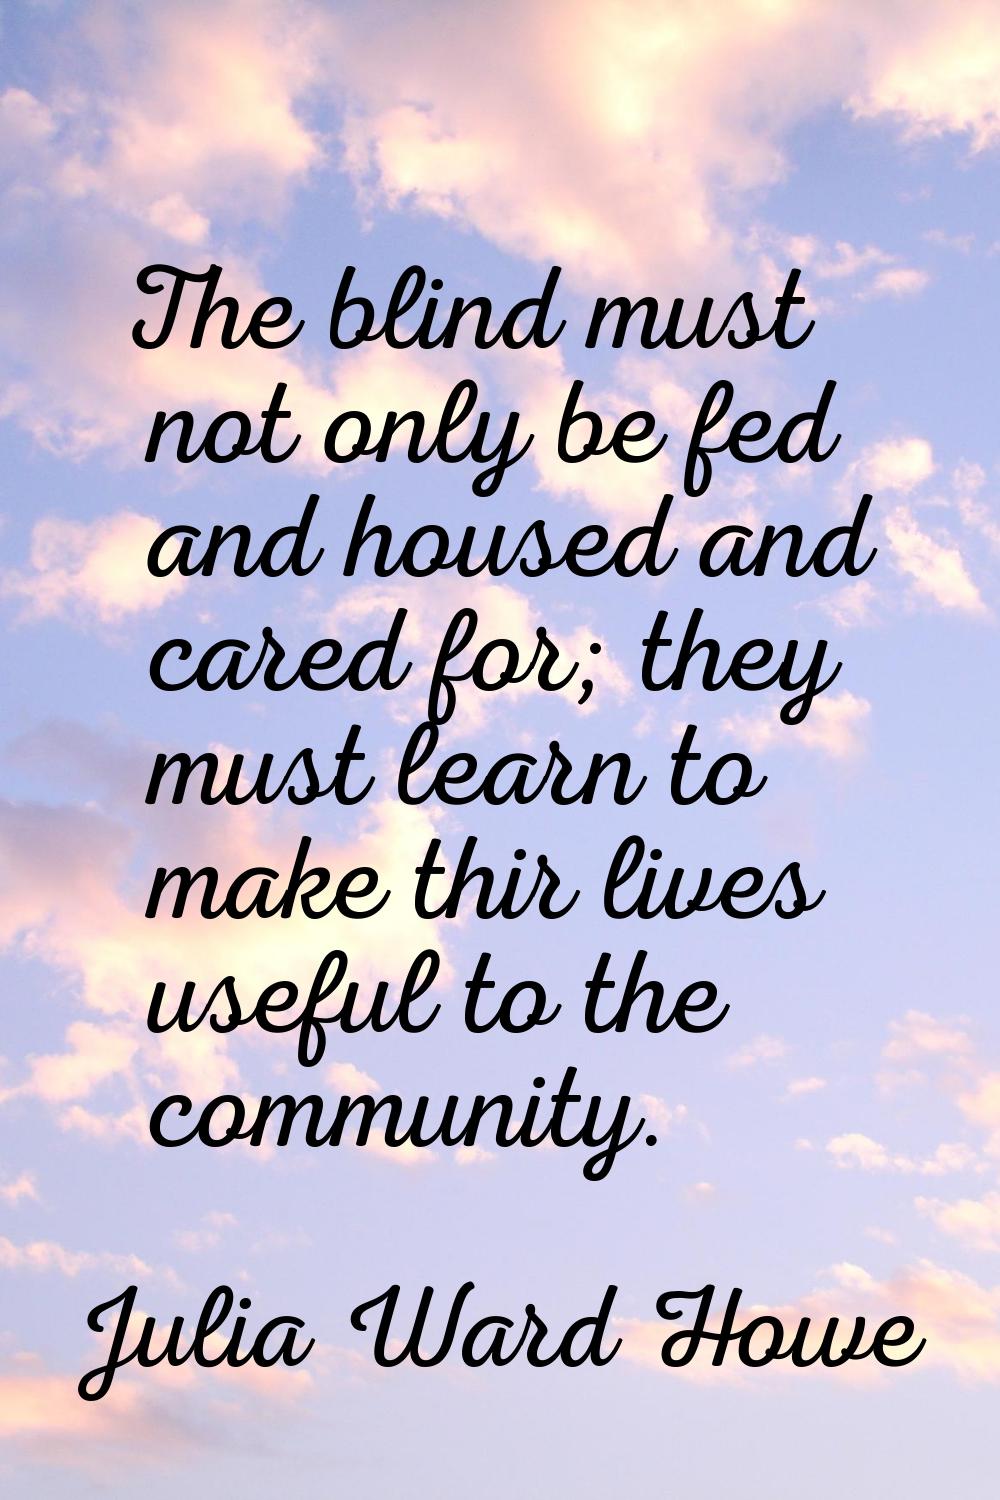 The blind must not only be fed and housed and cared for; they must learn to make thir lives useful 